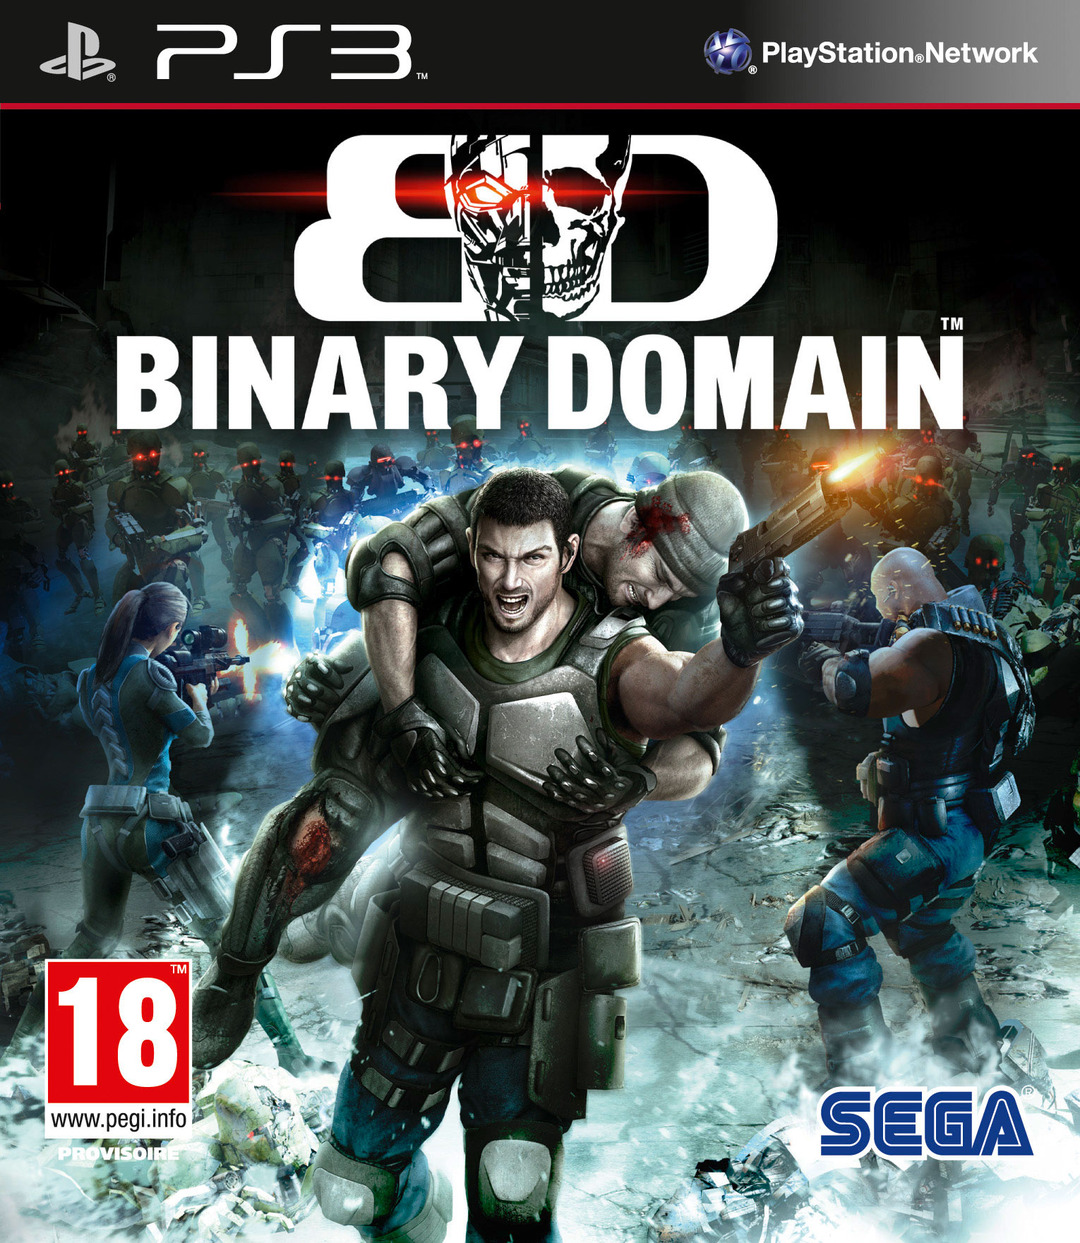 Binary domain (2012) ps3 Jaquette-binary-domain-playstation-3-ps3-cover-avant-g-1323091804